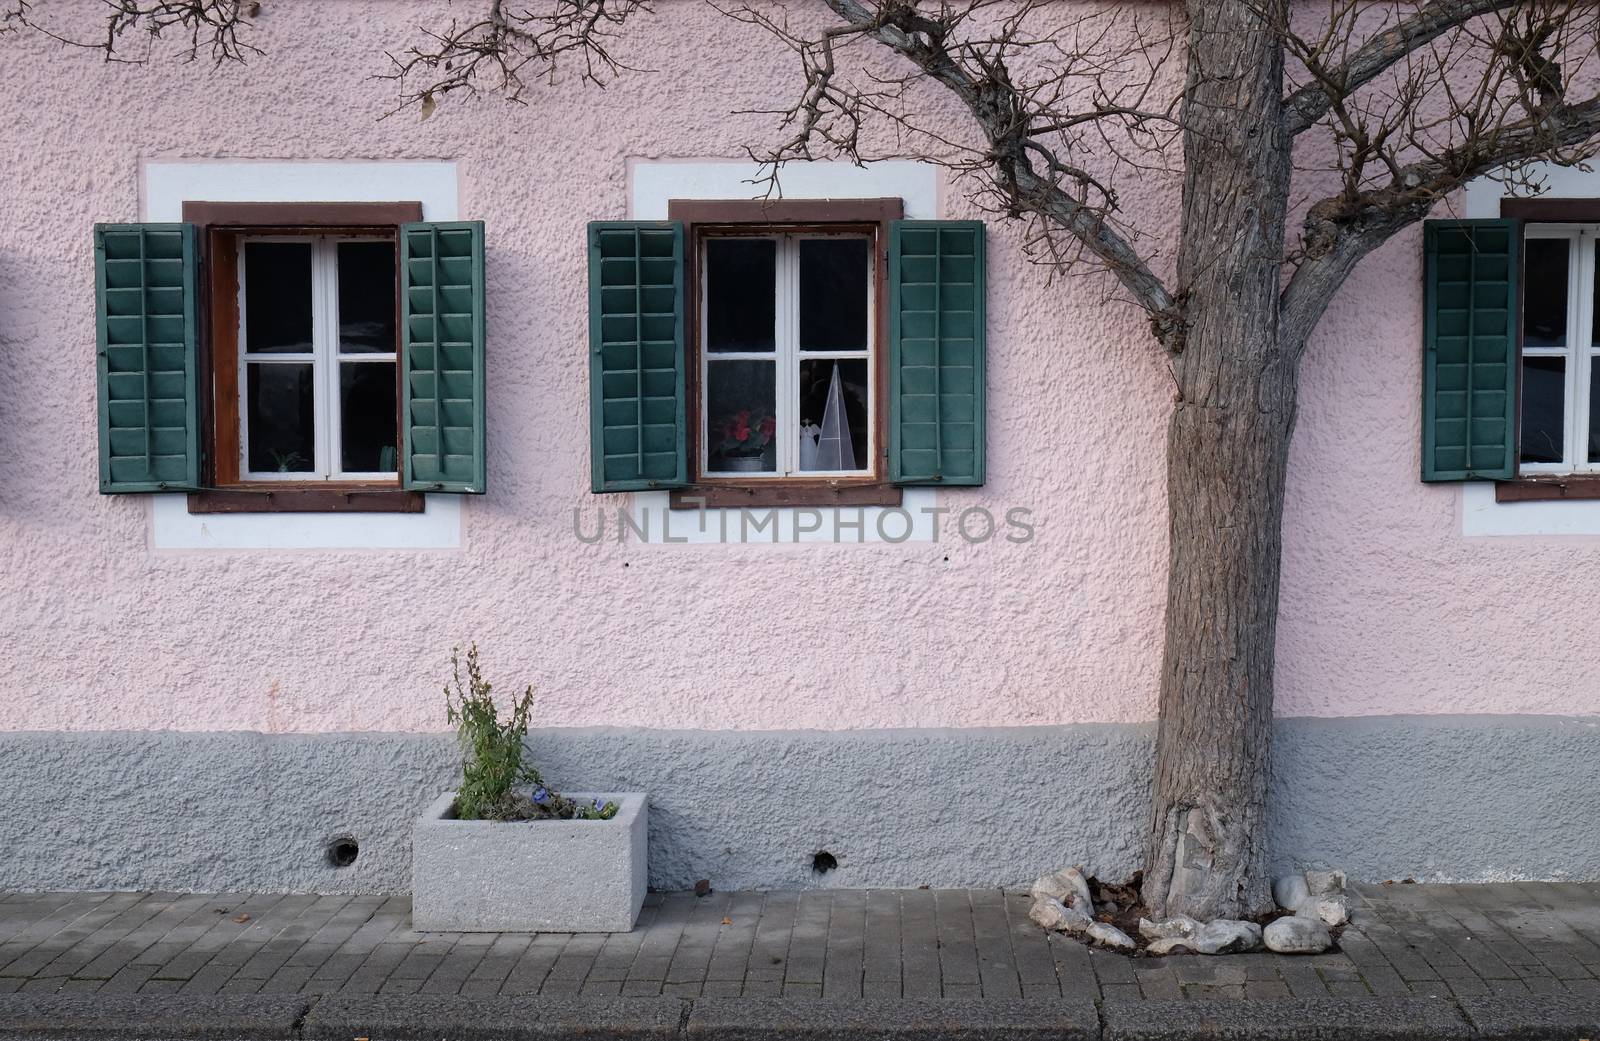 The tree grows next to the house in Hallstatt, Austria by atlas